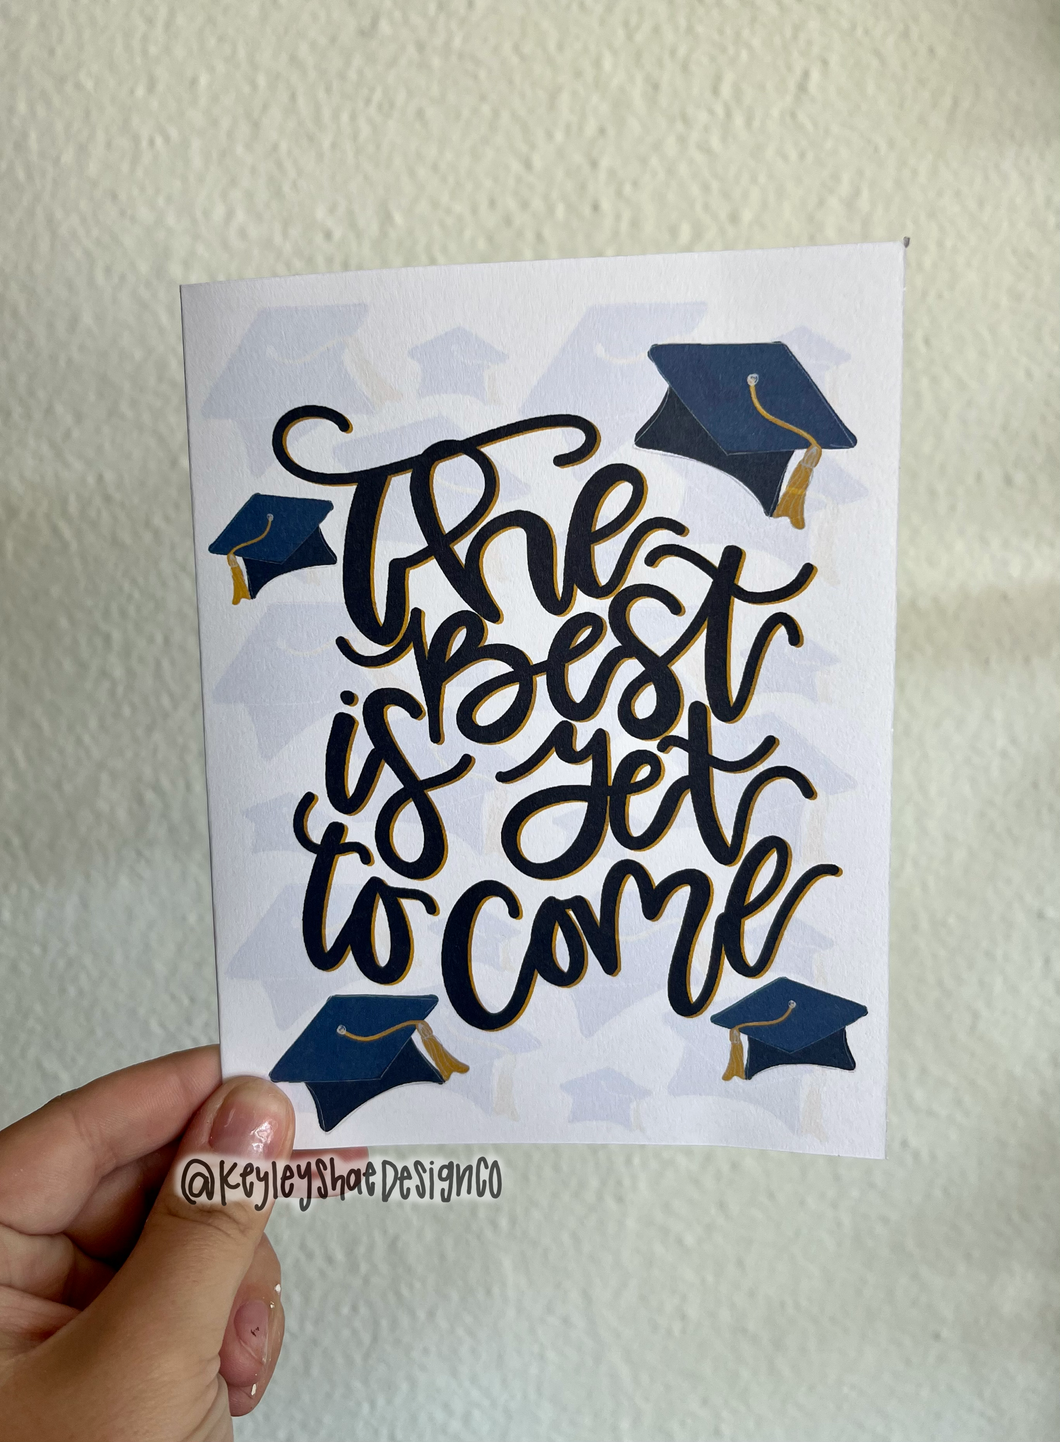 The Best Is Yet To Come - Grad Card